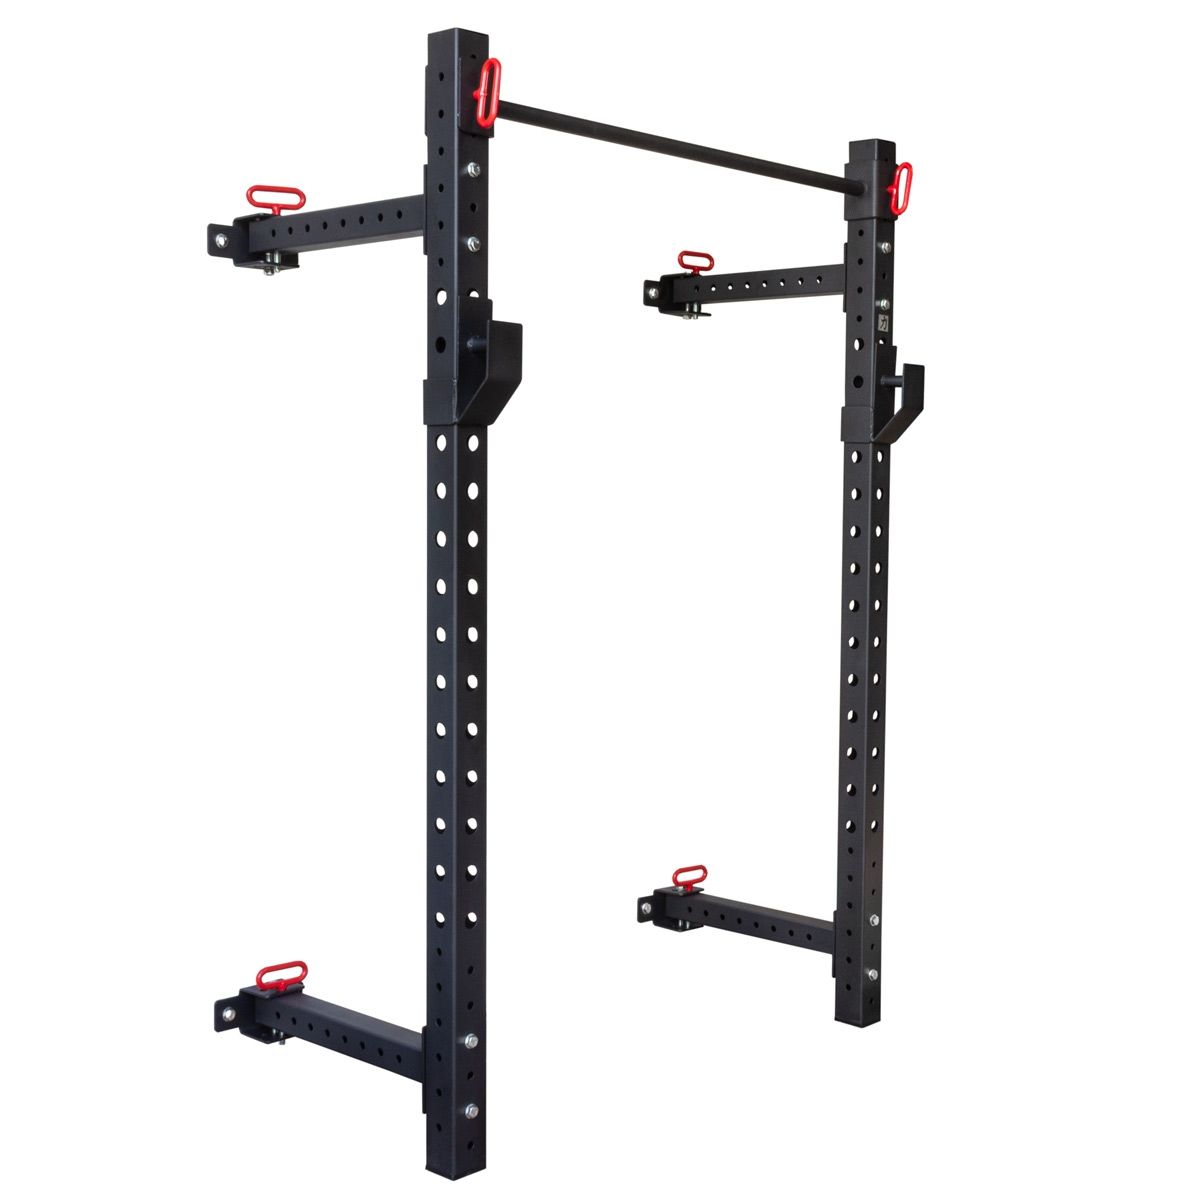 STRENGTHSYSTEM Riot garage wall mounted 1.9M